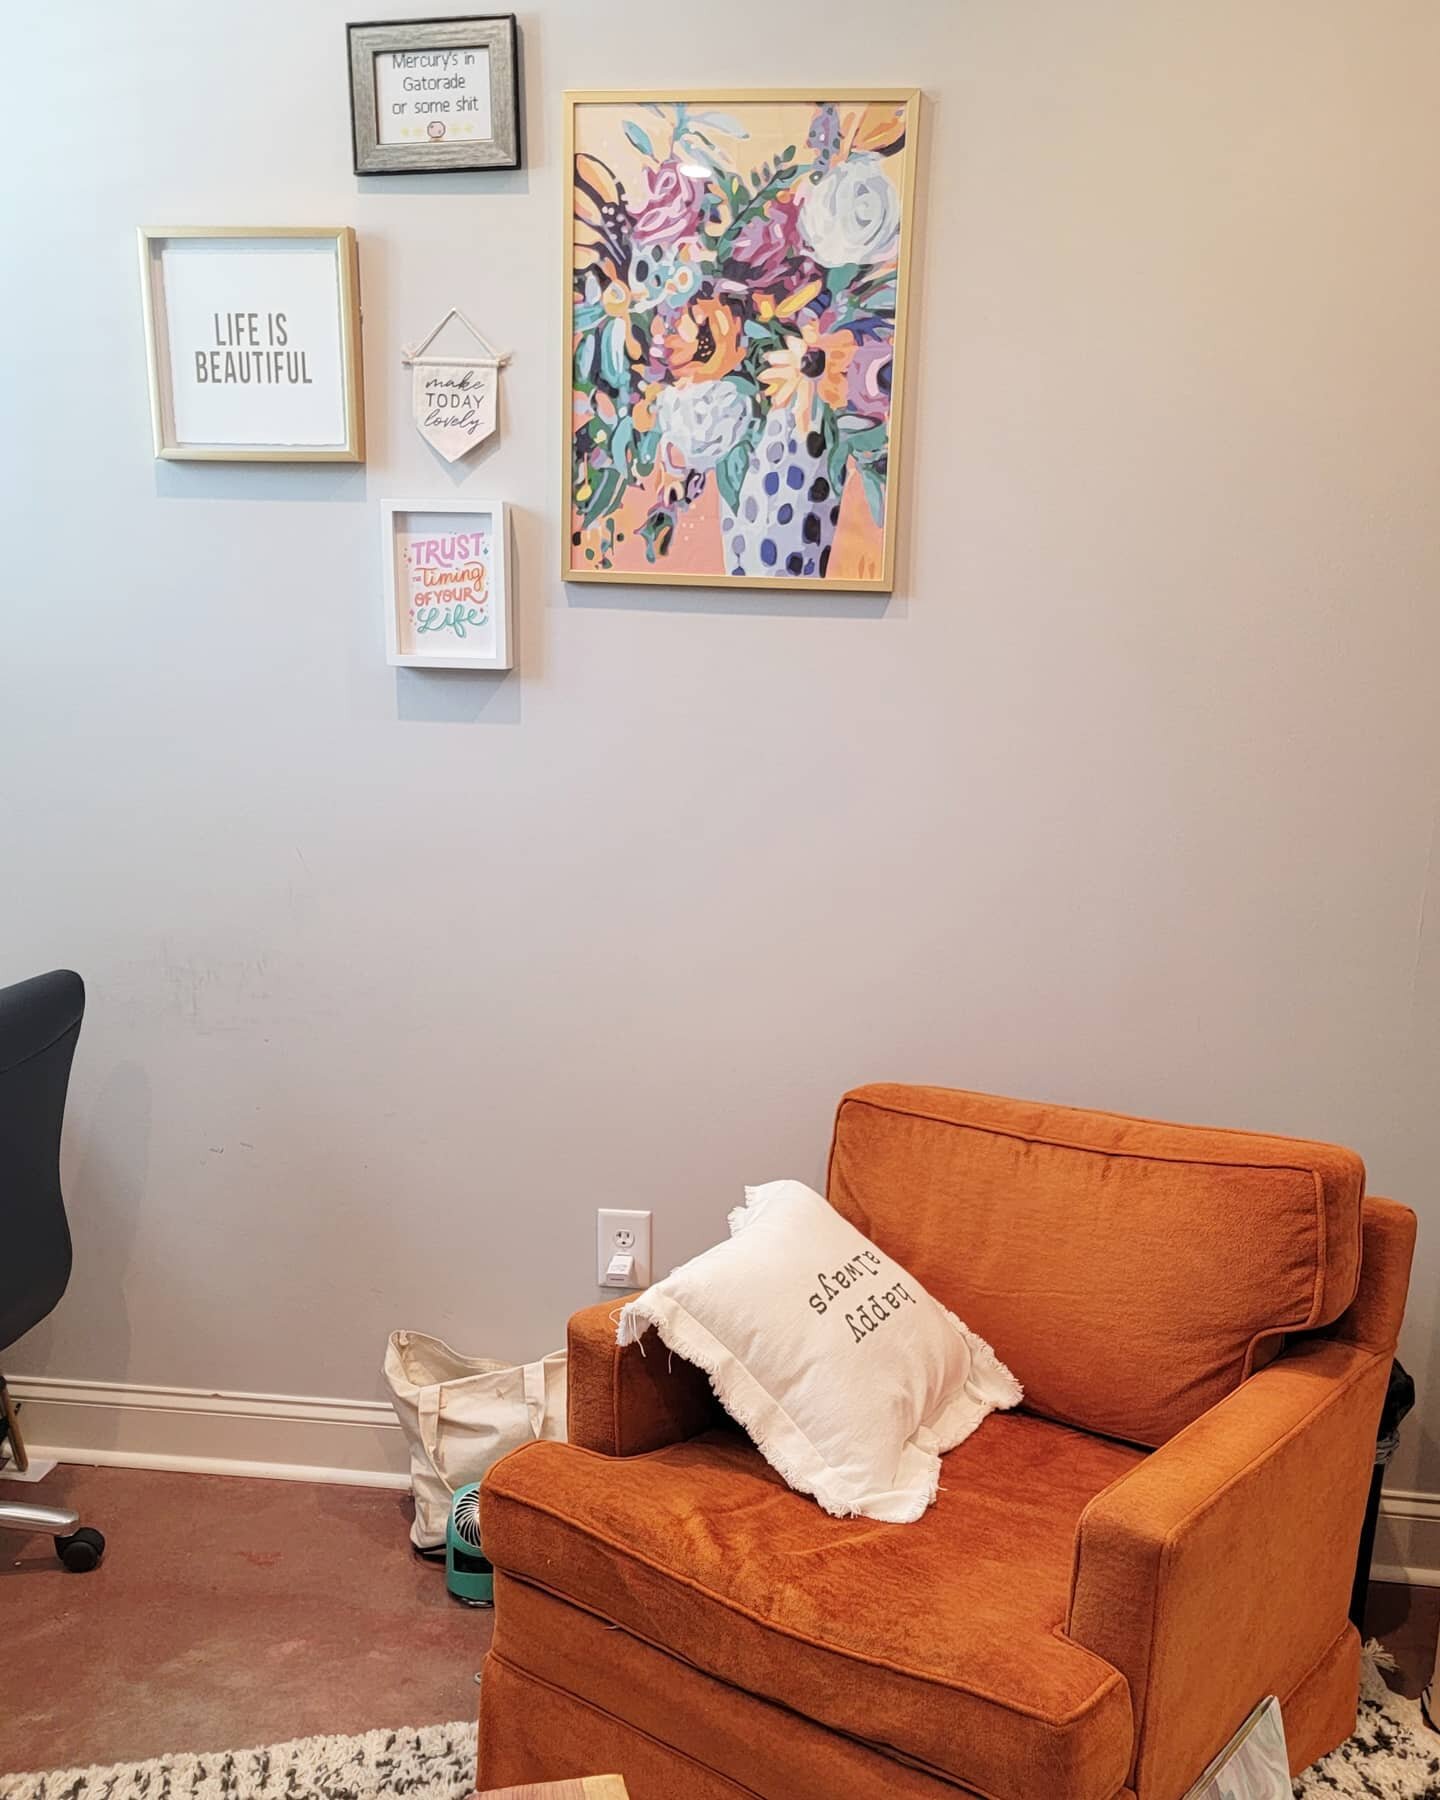 I love my cozy office
.
.
.
.
#therapy #therapist #counseling #counselor #mentalhealth #mentalhealthmatters #veterans #mentalhealthawareness #therapistsofinstagram #selfcare #empathy #mindfulness #therapylove #bethanykline_apcncc #communication #insp